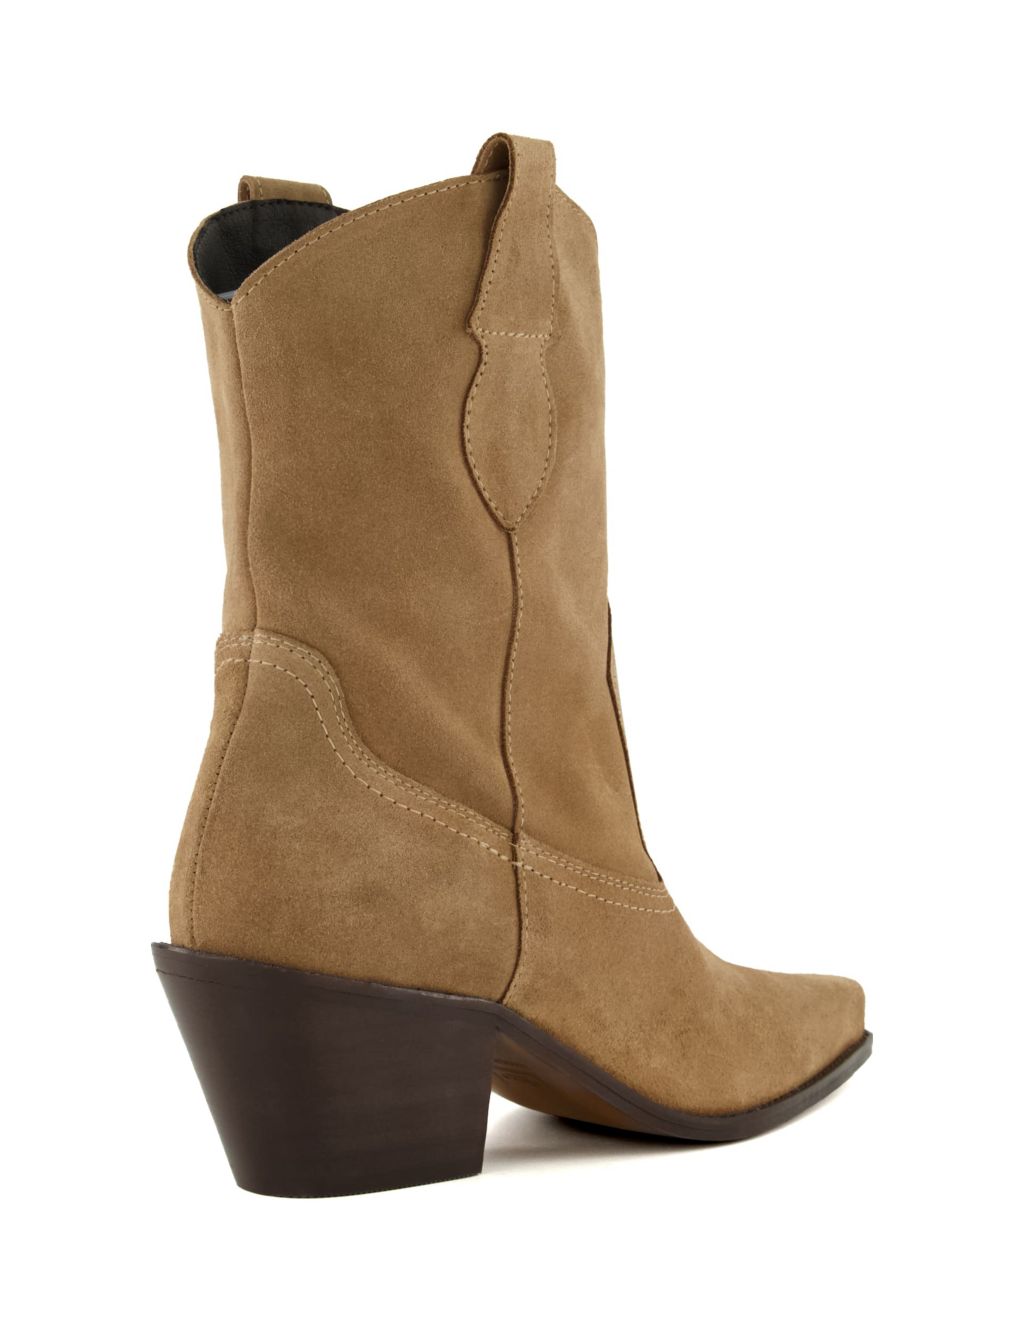 Suede Pull On Western Boots image 4